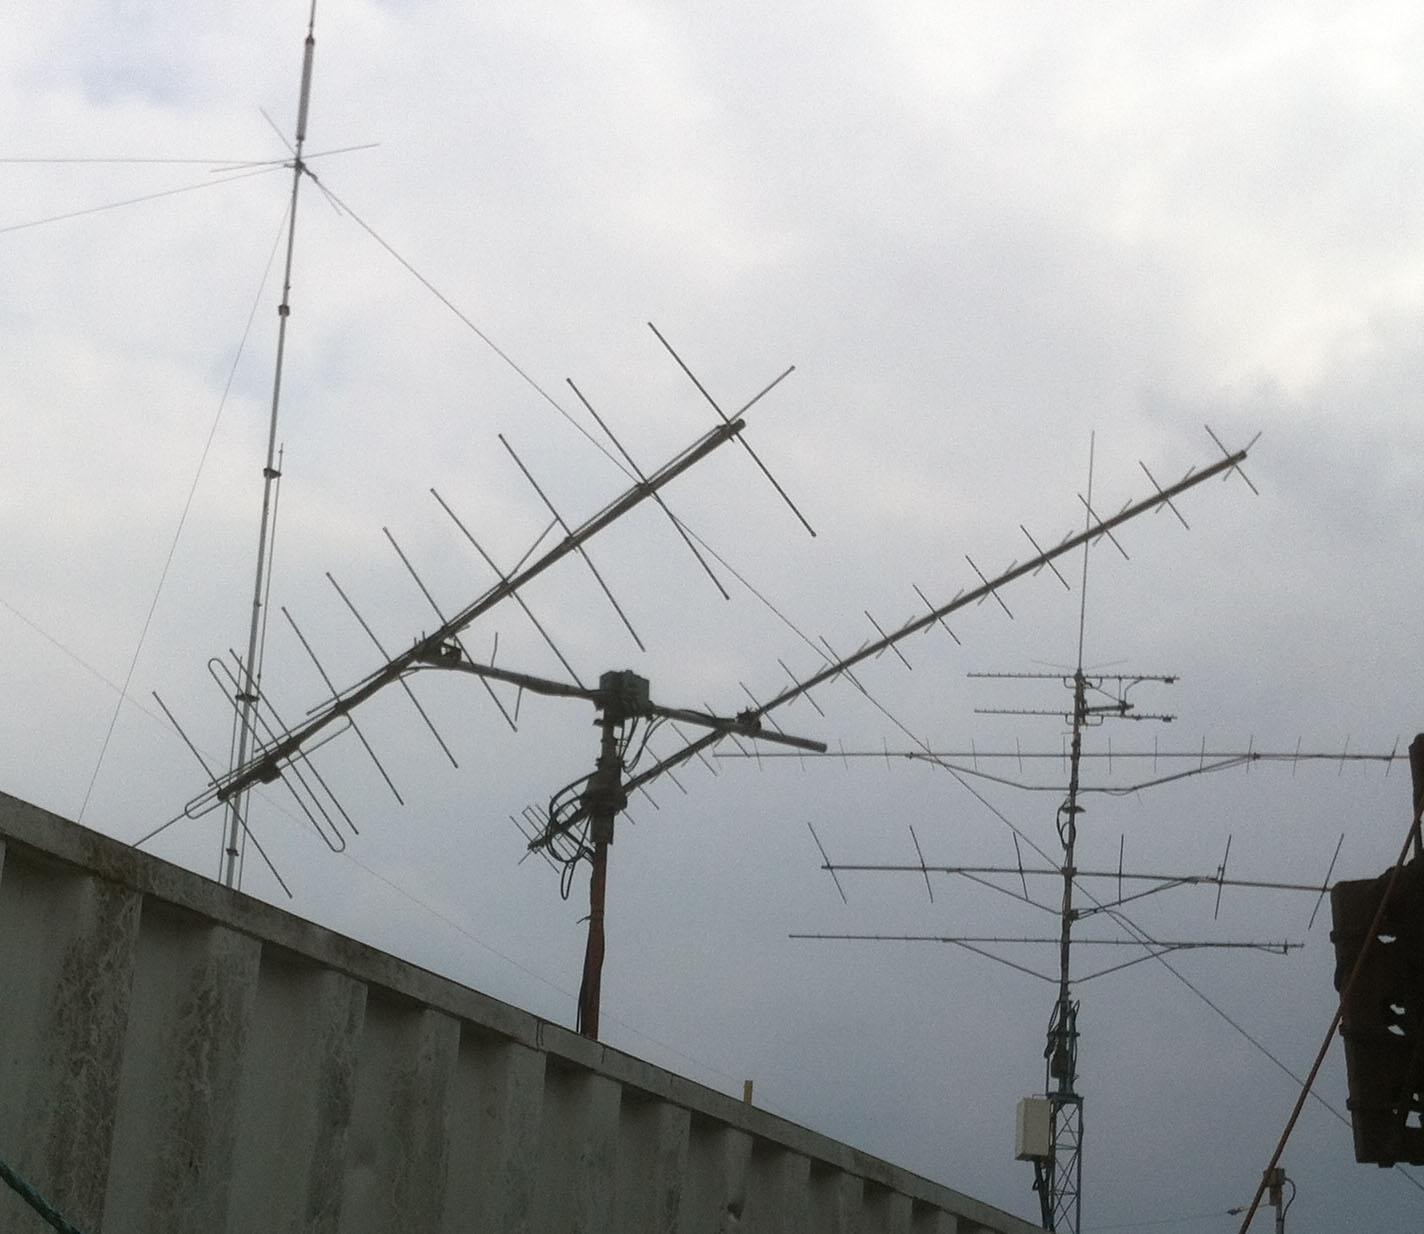 How to use a kite antenna in amateur radio